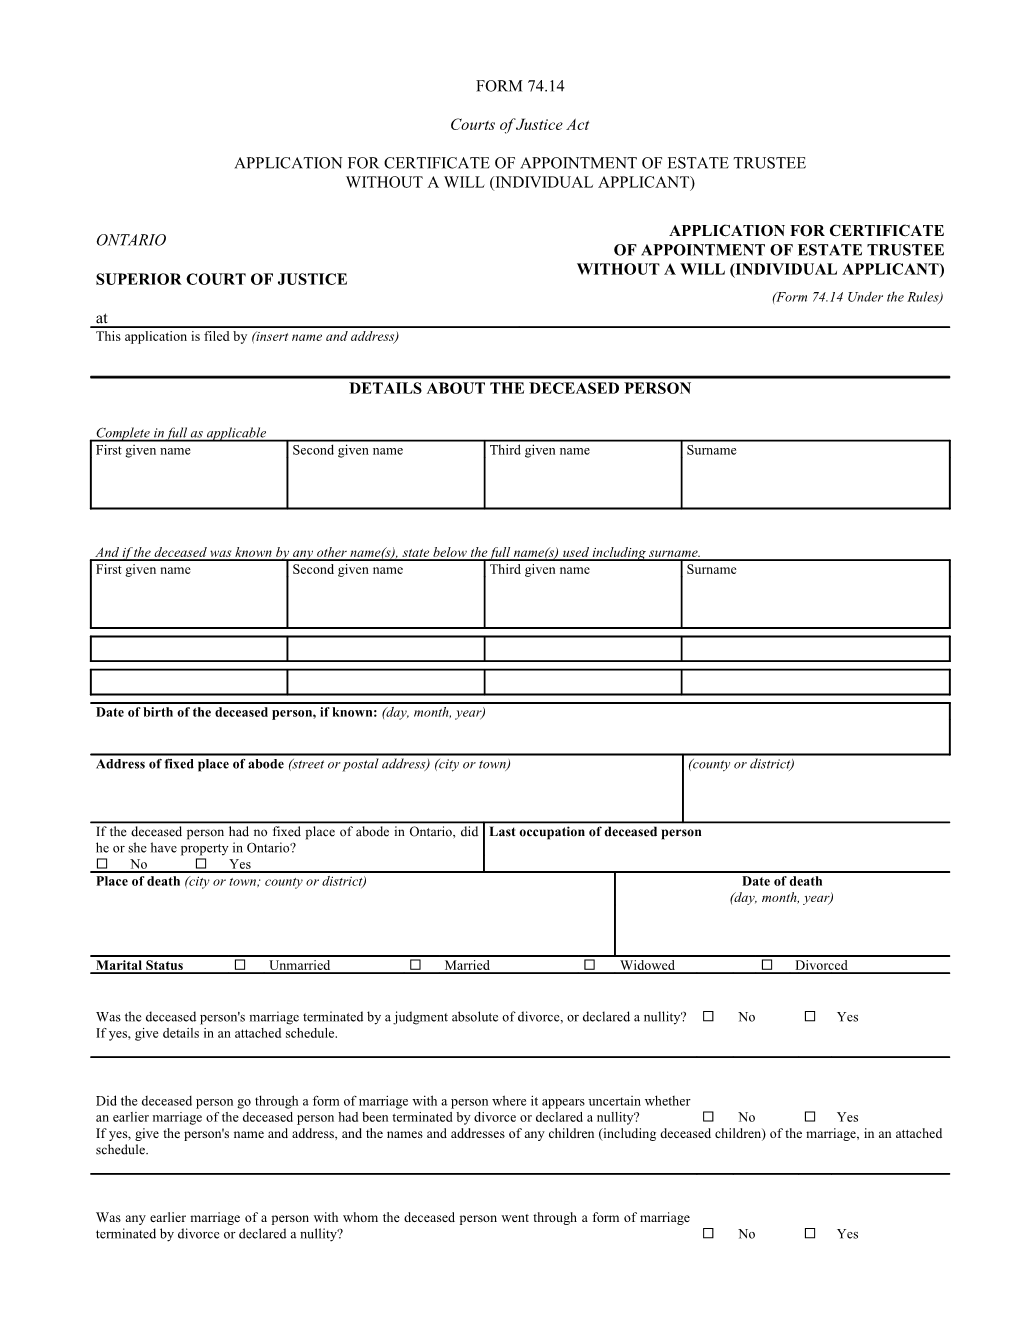 Notice to Applicant : Information Provided on This Form Related to the Payment of Estate